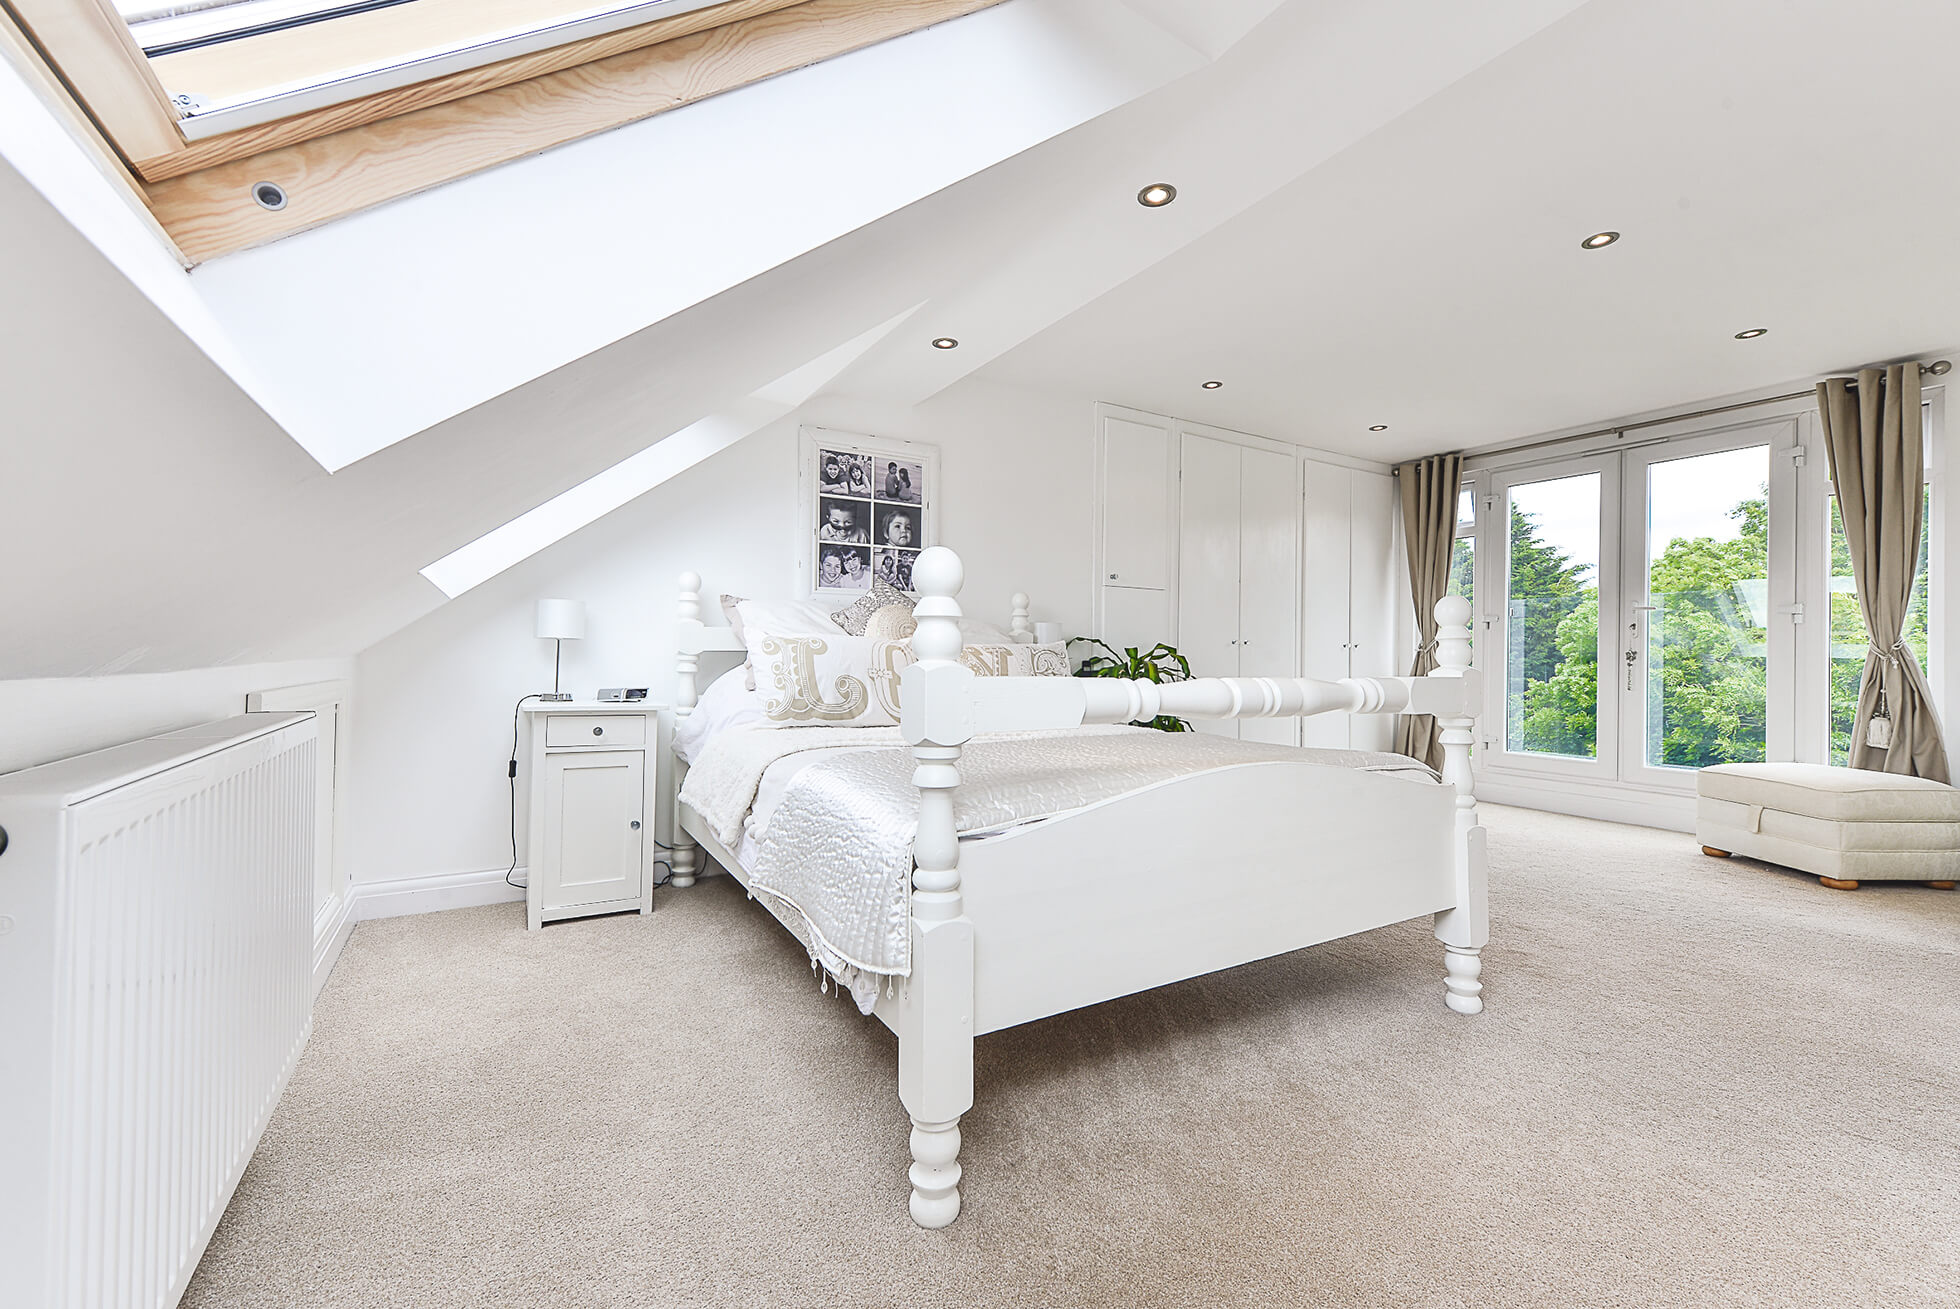 Do you have a question about converting your Loft in Great Offley? Here are the most popular questions asked by our clients.